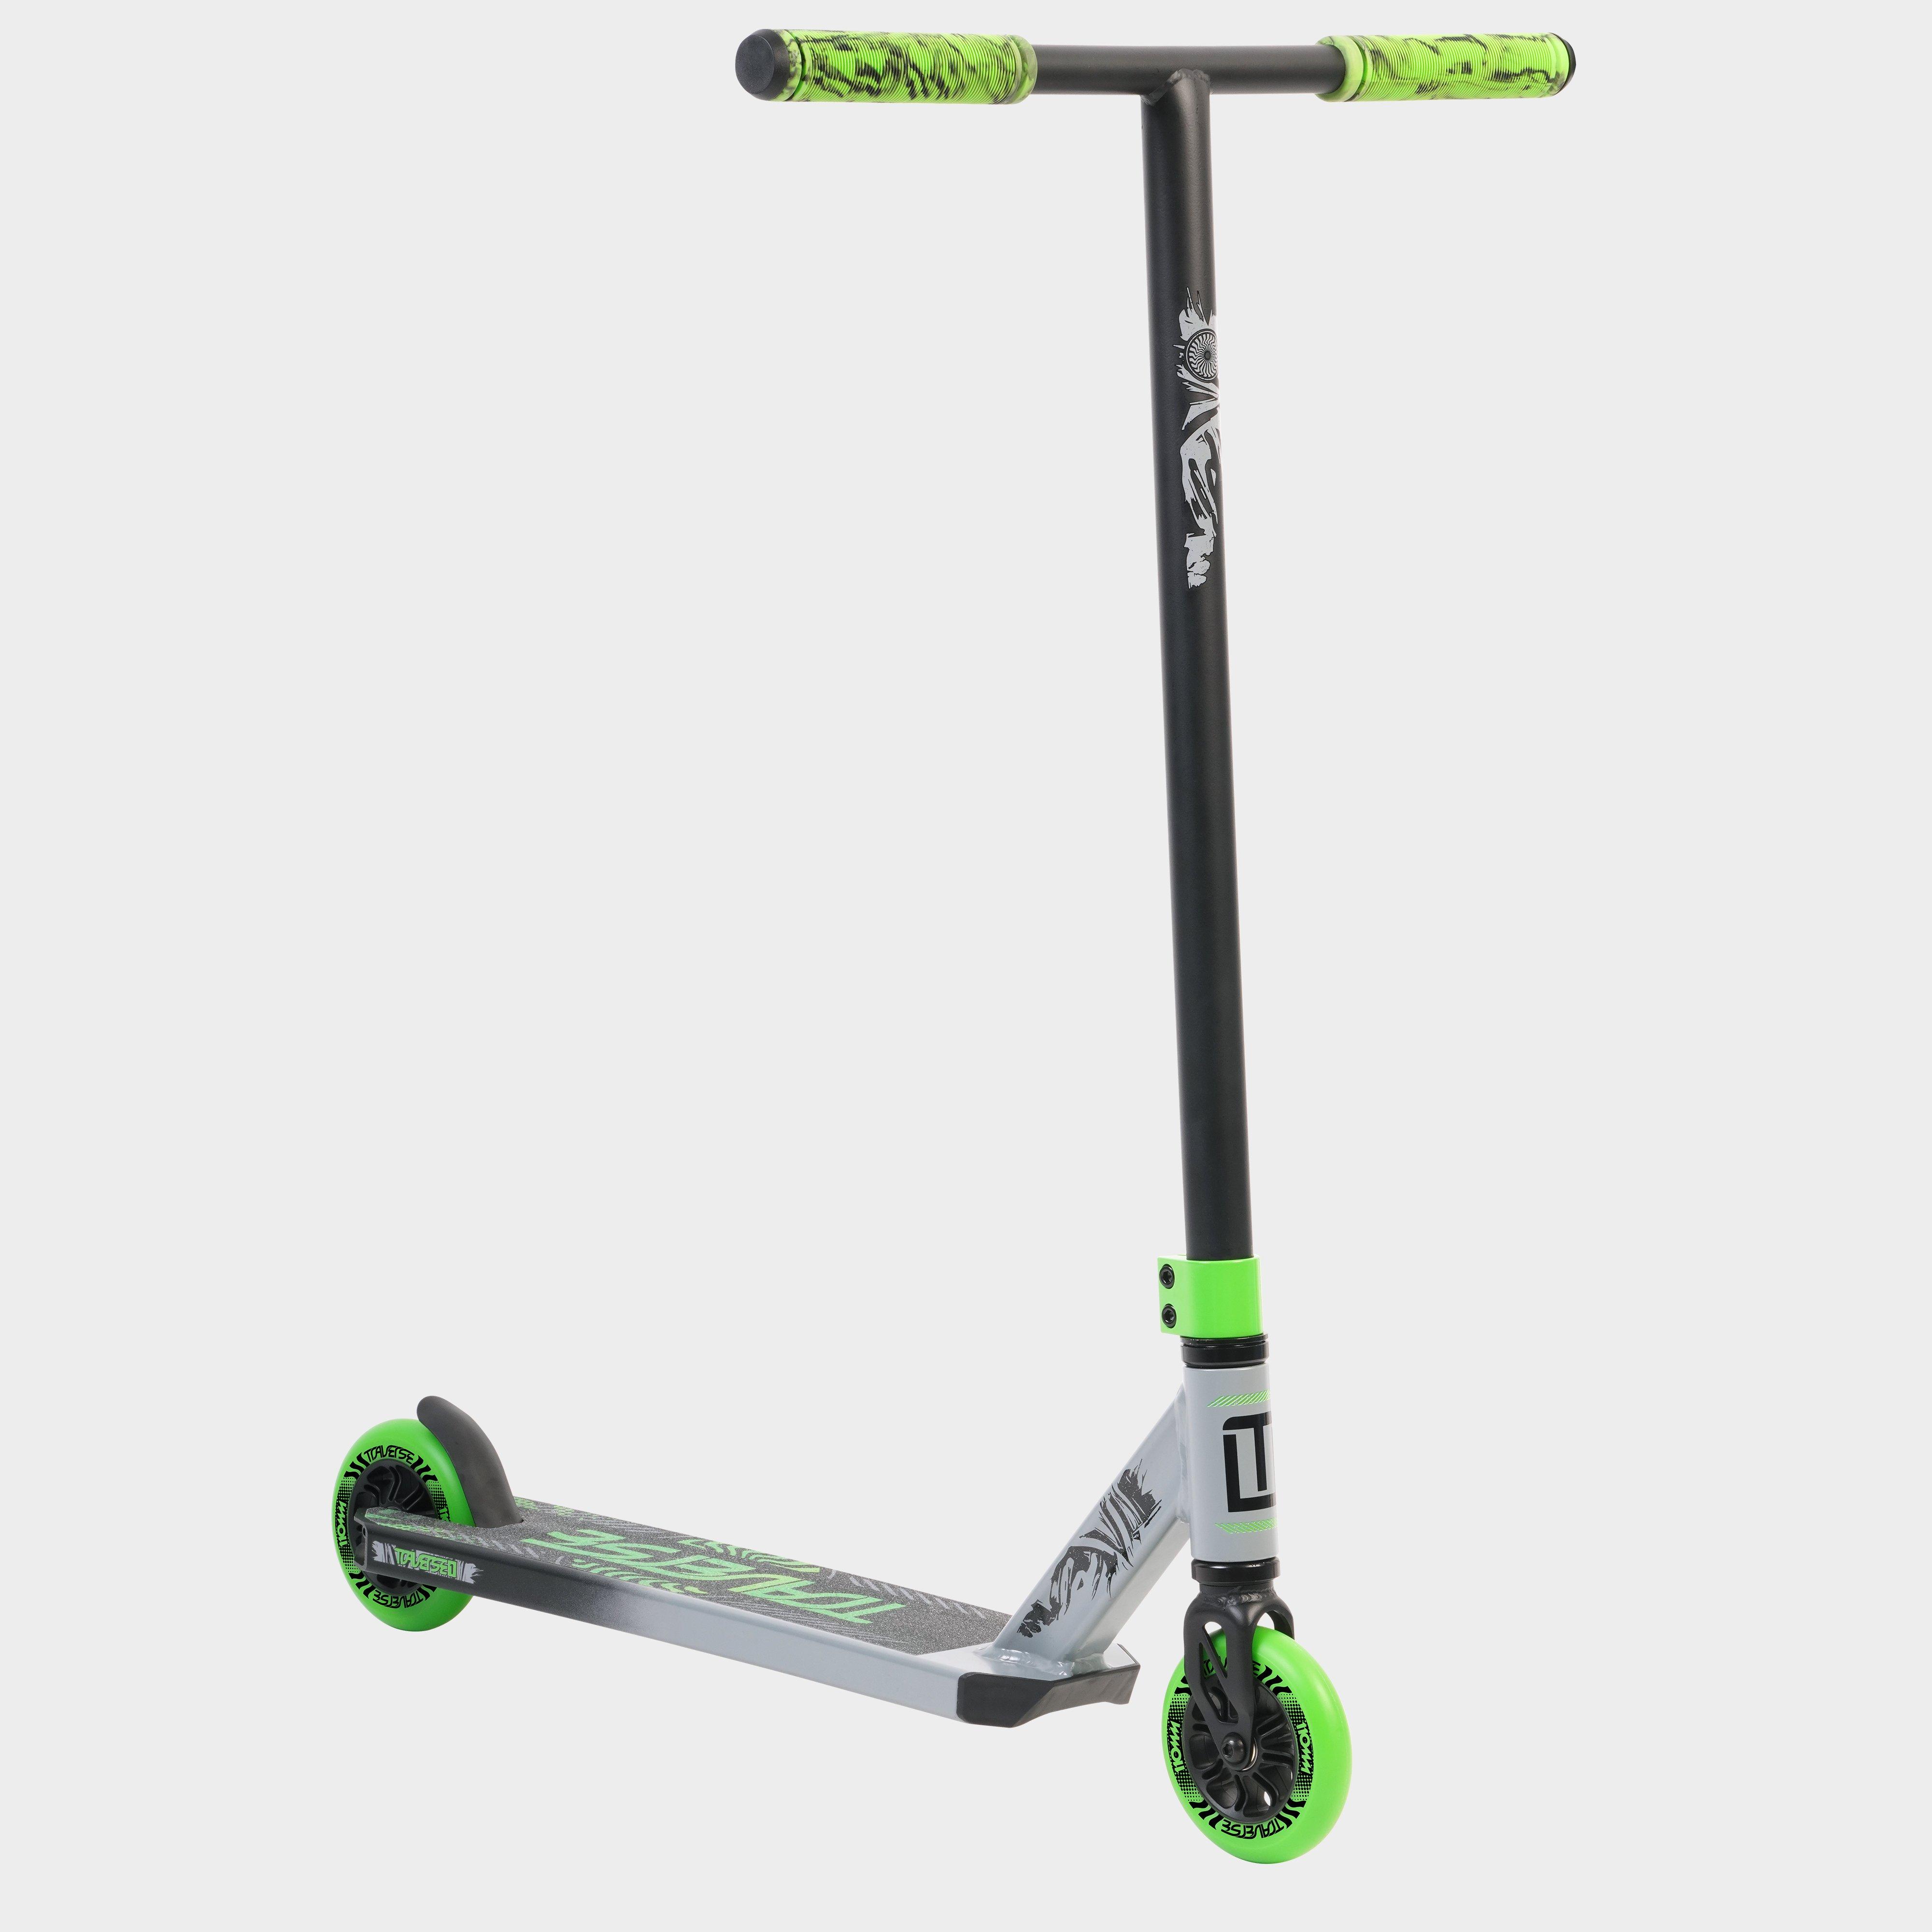 Image of Traverse Lv1 Stunt Scooter - Green, Green